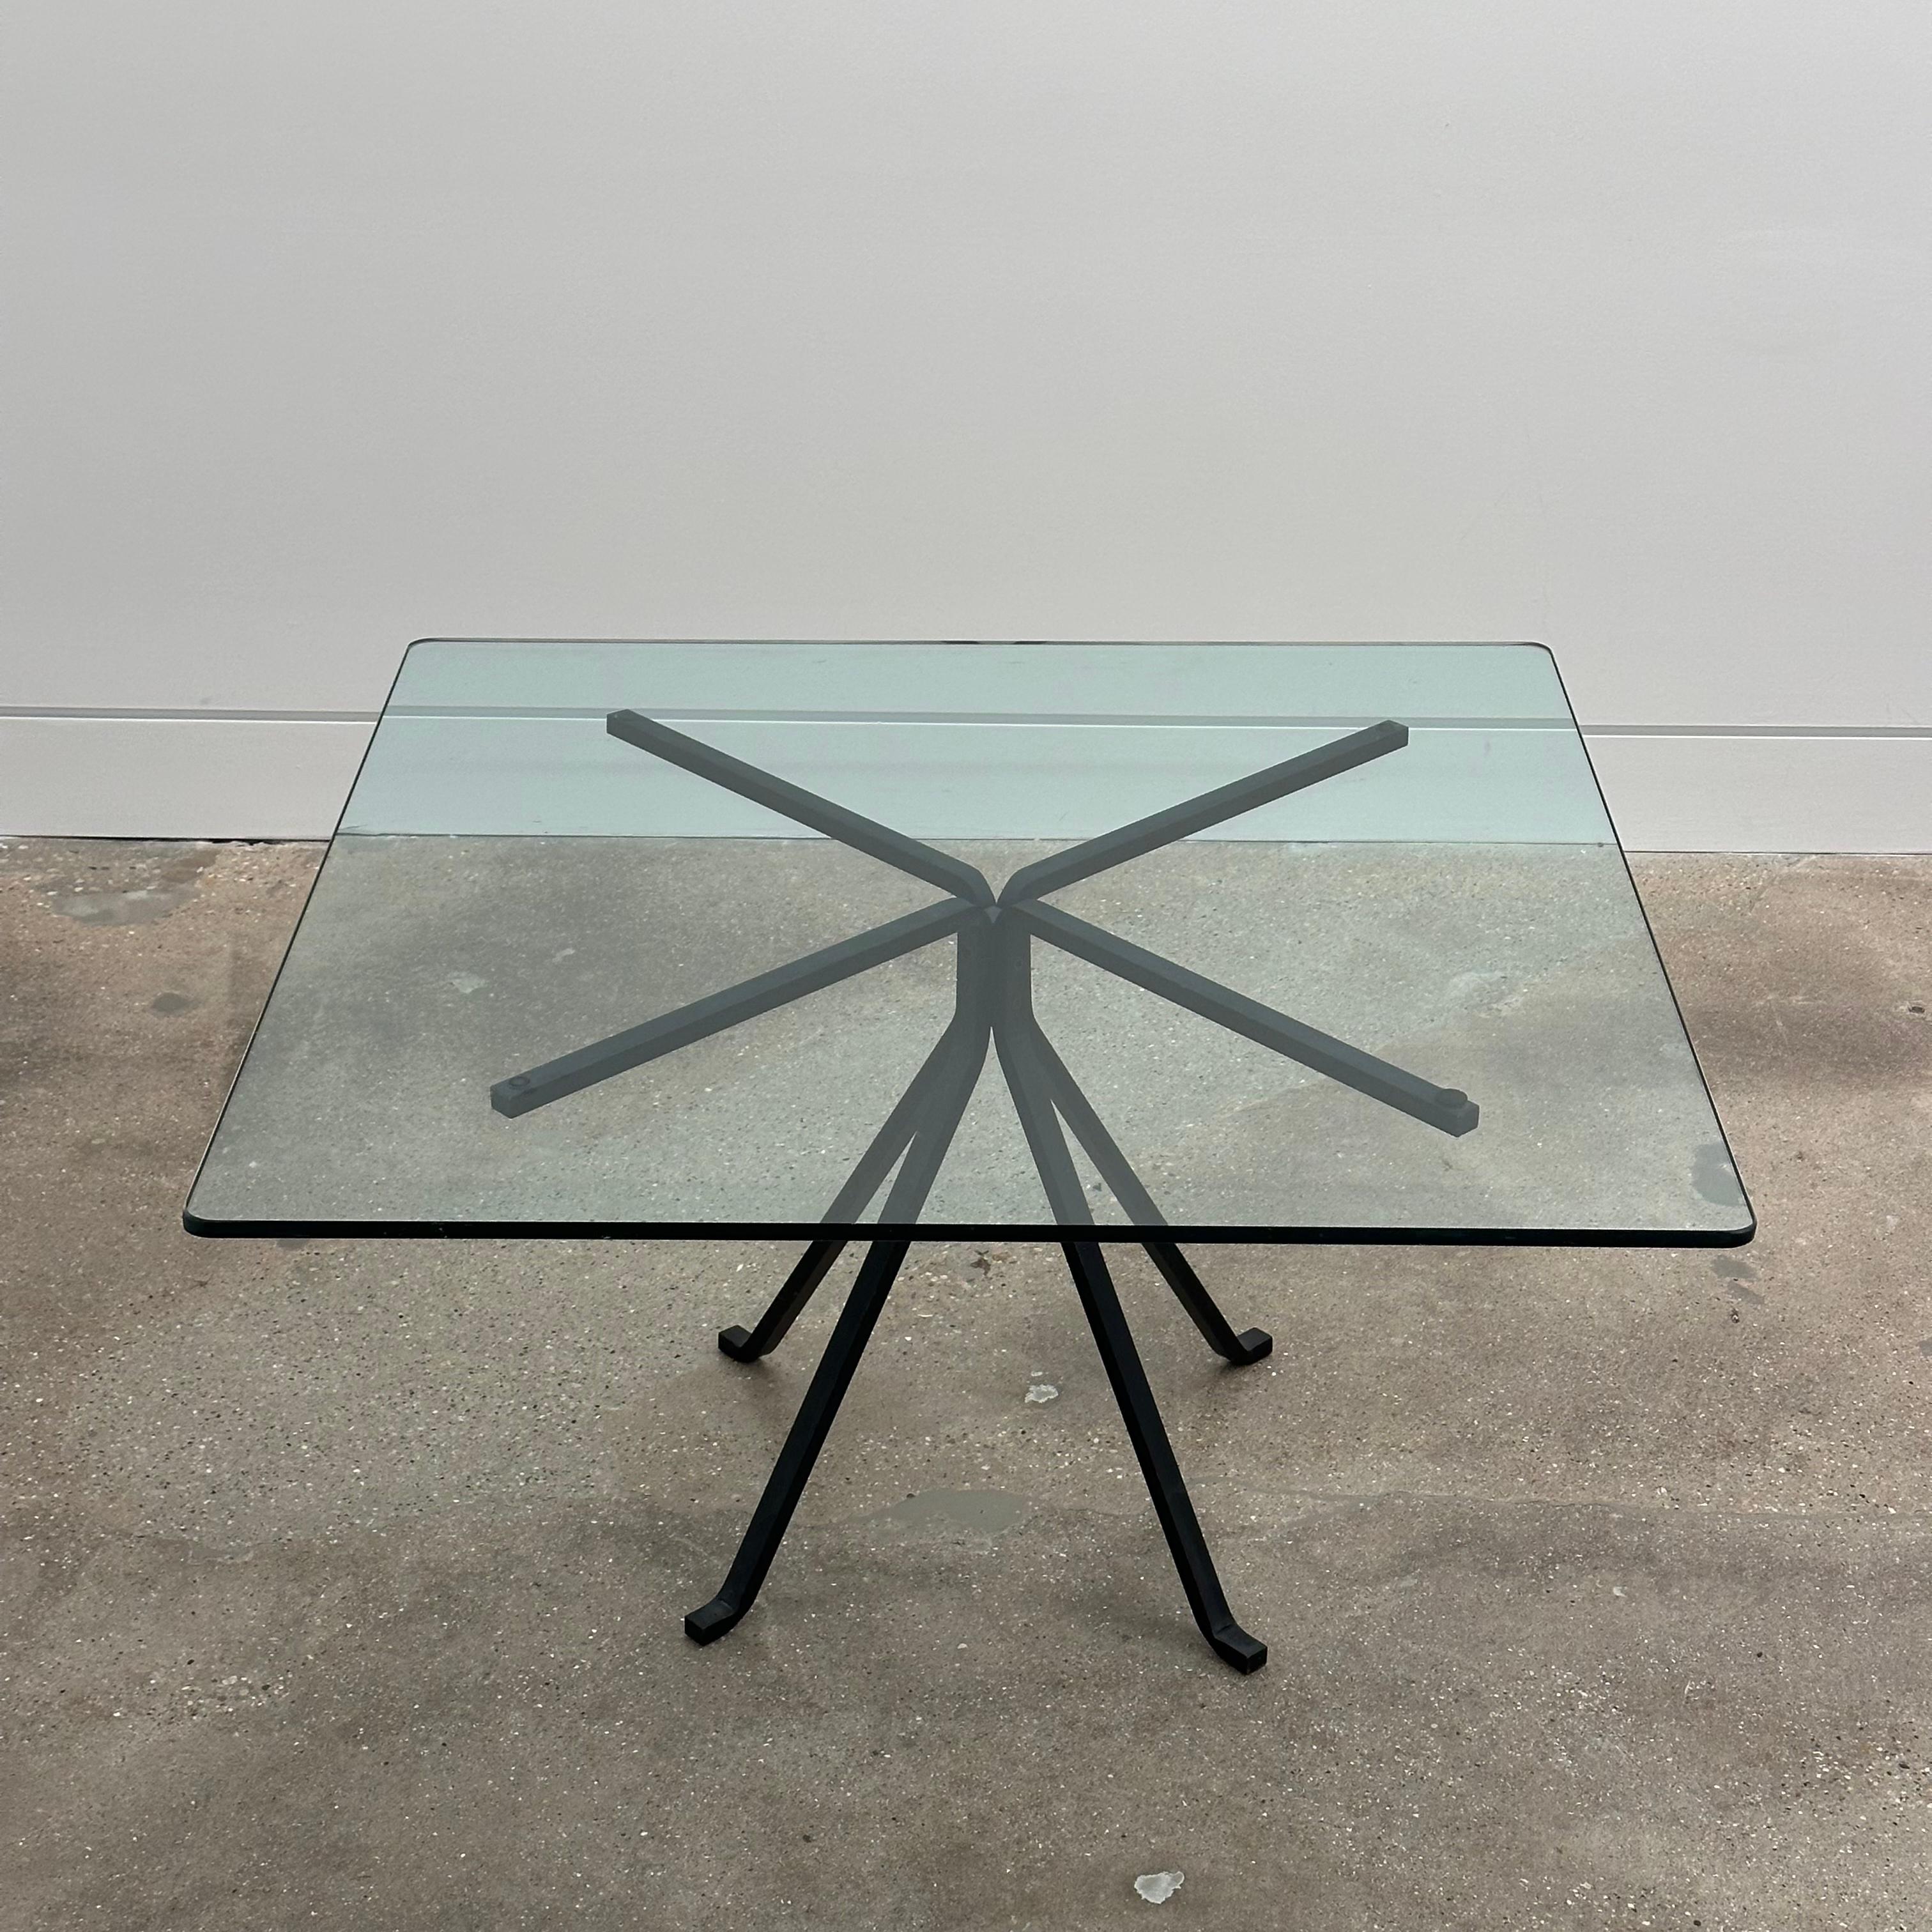 Enzo Mari ”Cuginetto” coffee table for Driade, Italy 1976. A quiet dynamism achieved through a clever combination of transparencies and sleek lines distinguishes this coffee table by Enzo Mari. Four legs are bent at the base to incorporate the feet,